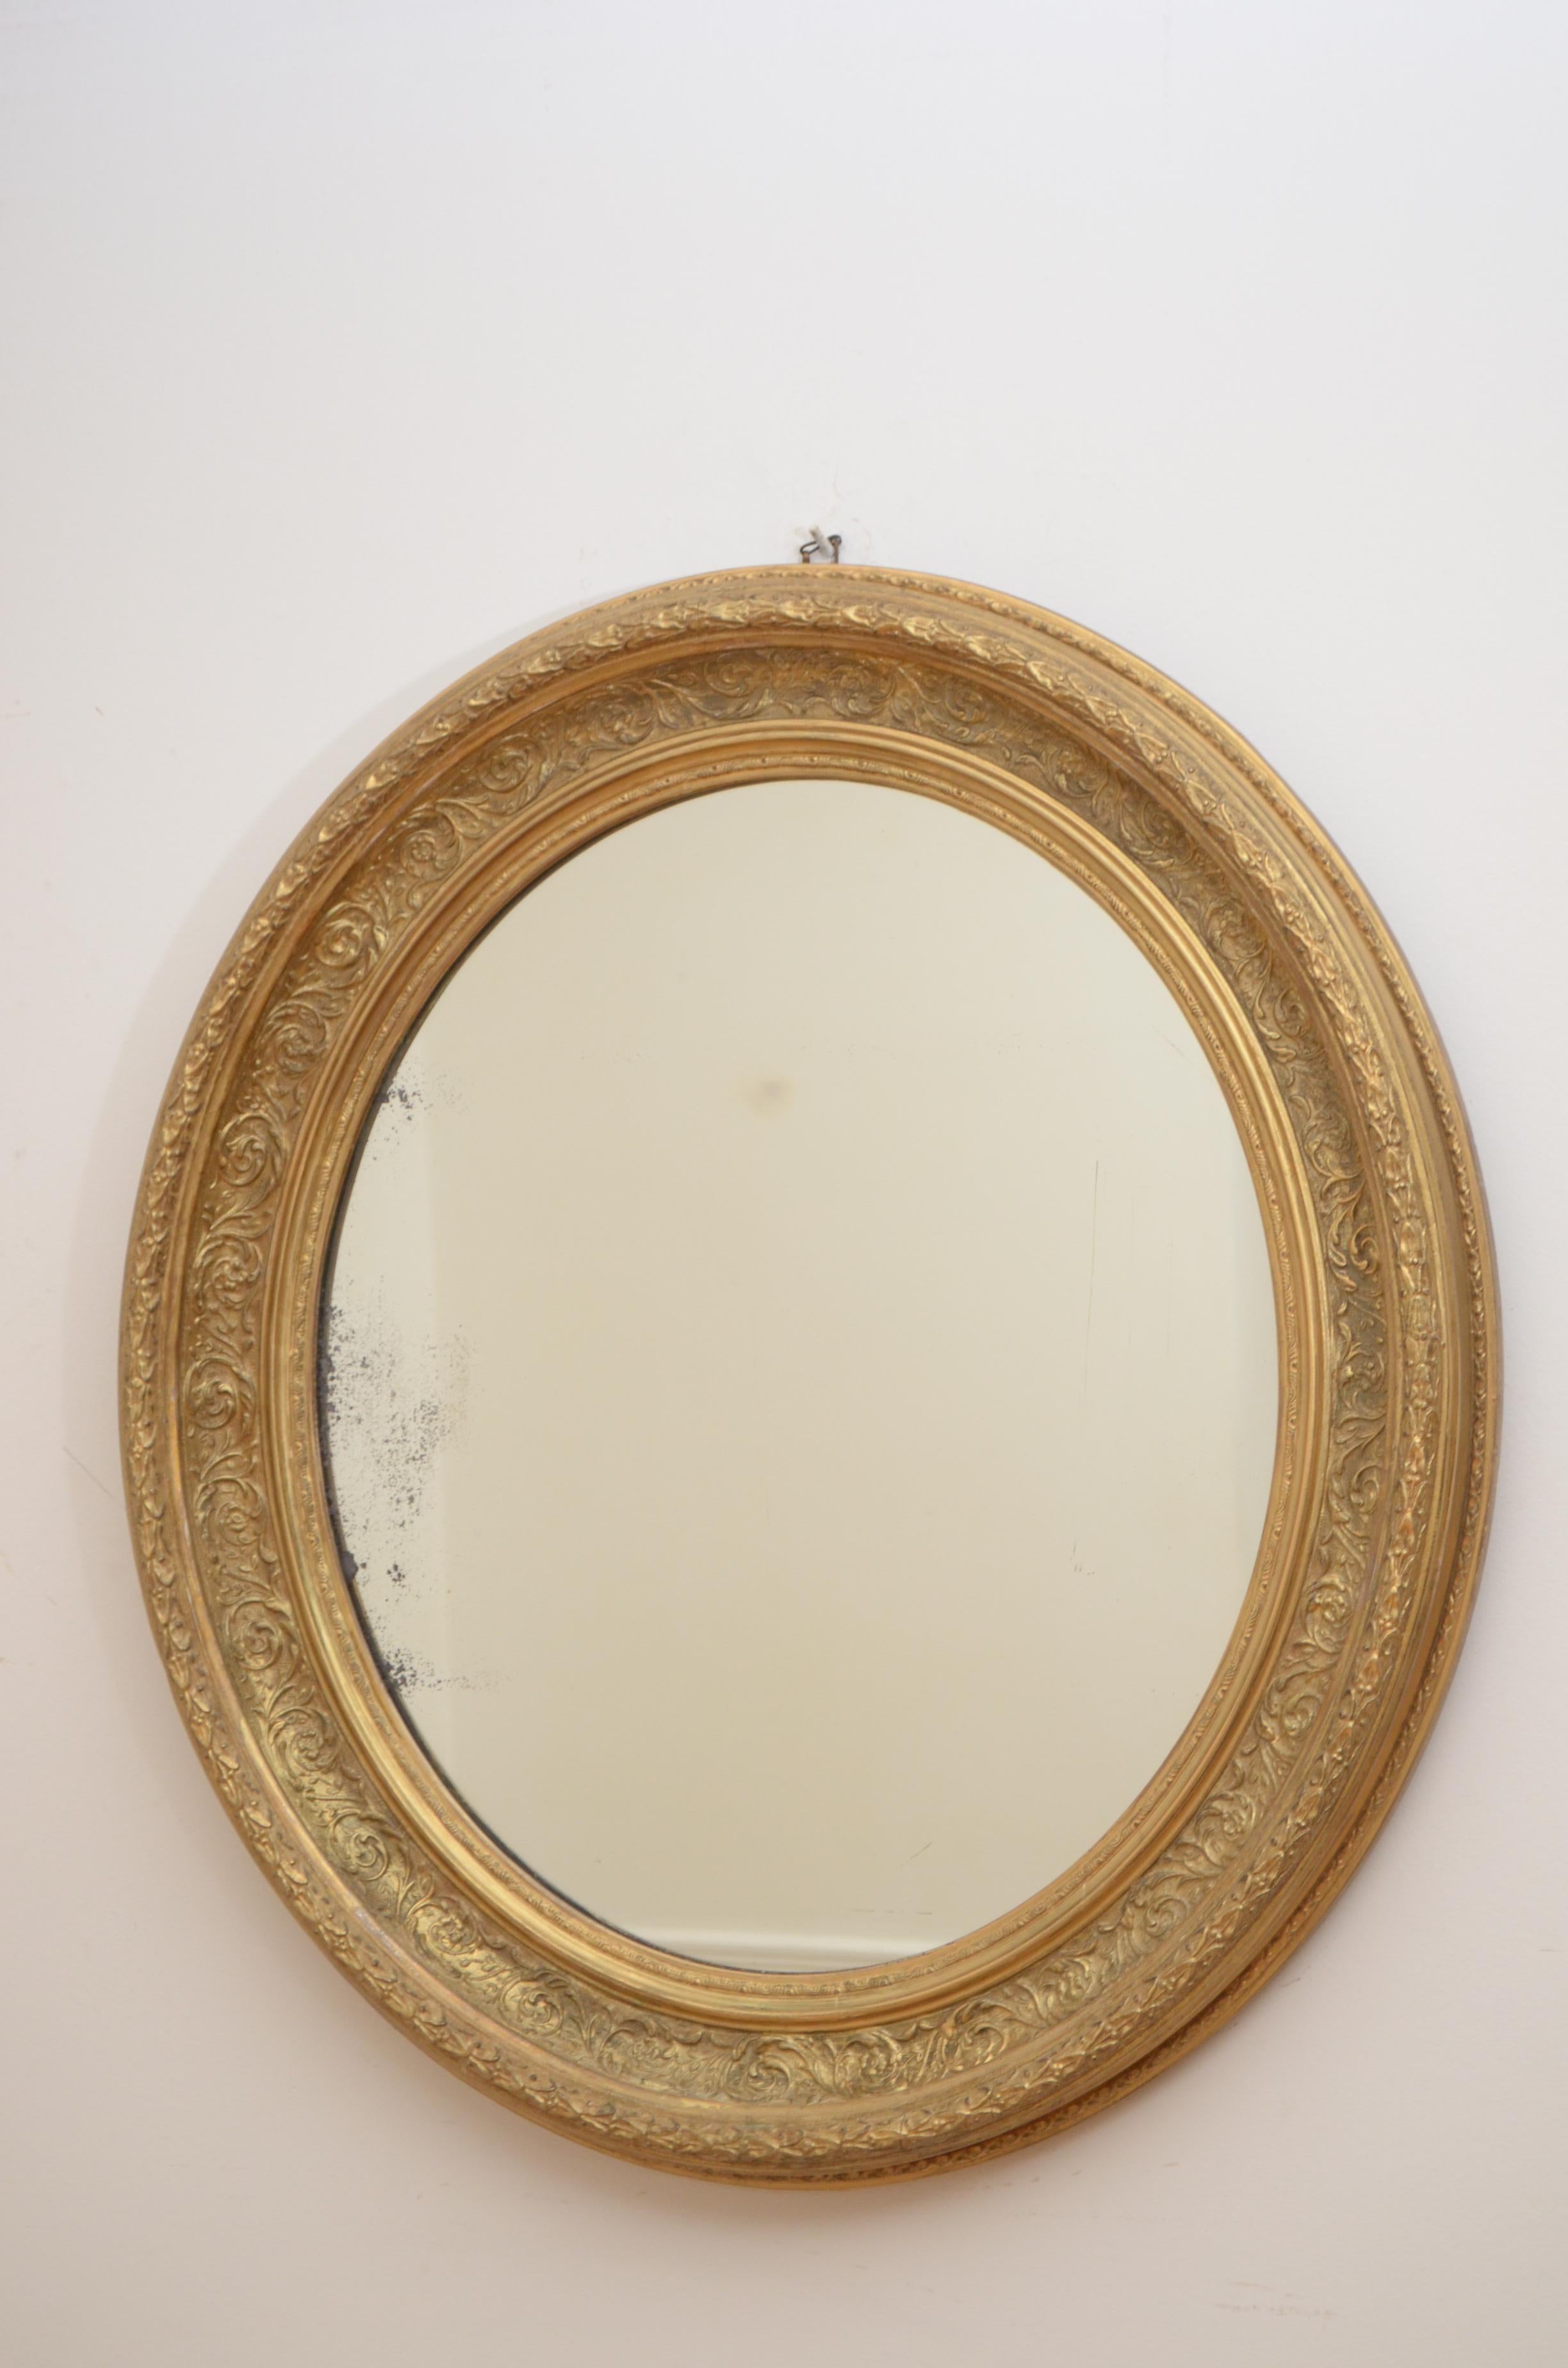 K0396, attractive Victorian oval mirror, having original glass with some foxing in floral decorated and gilded frame. This antique mirror retains its original glass, gilt with some touching up and backboard, all in excellent home ready condition,